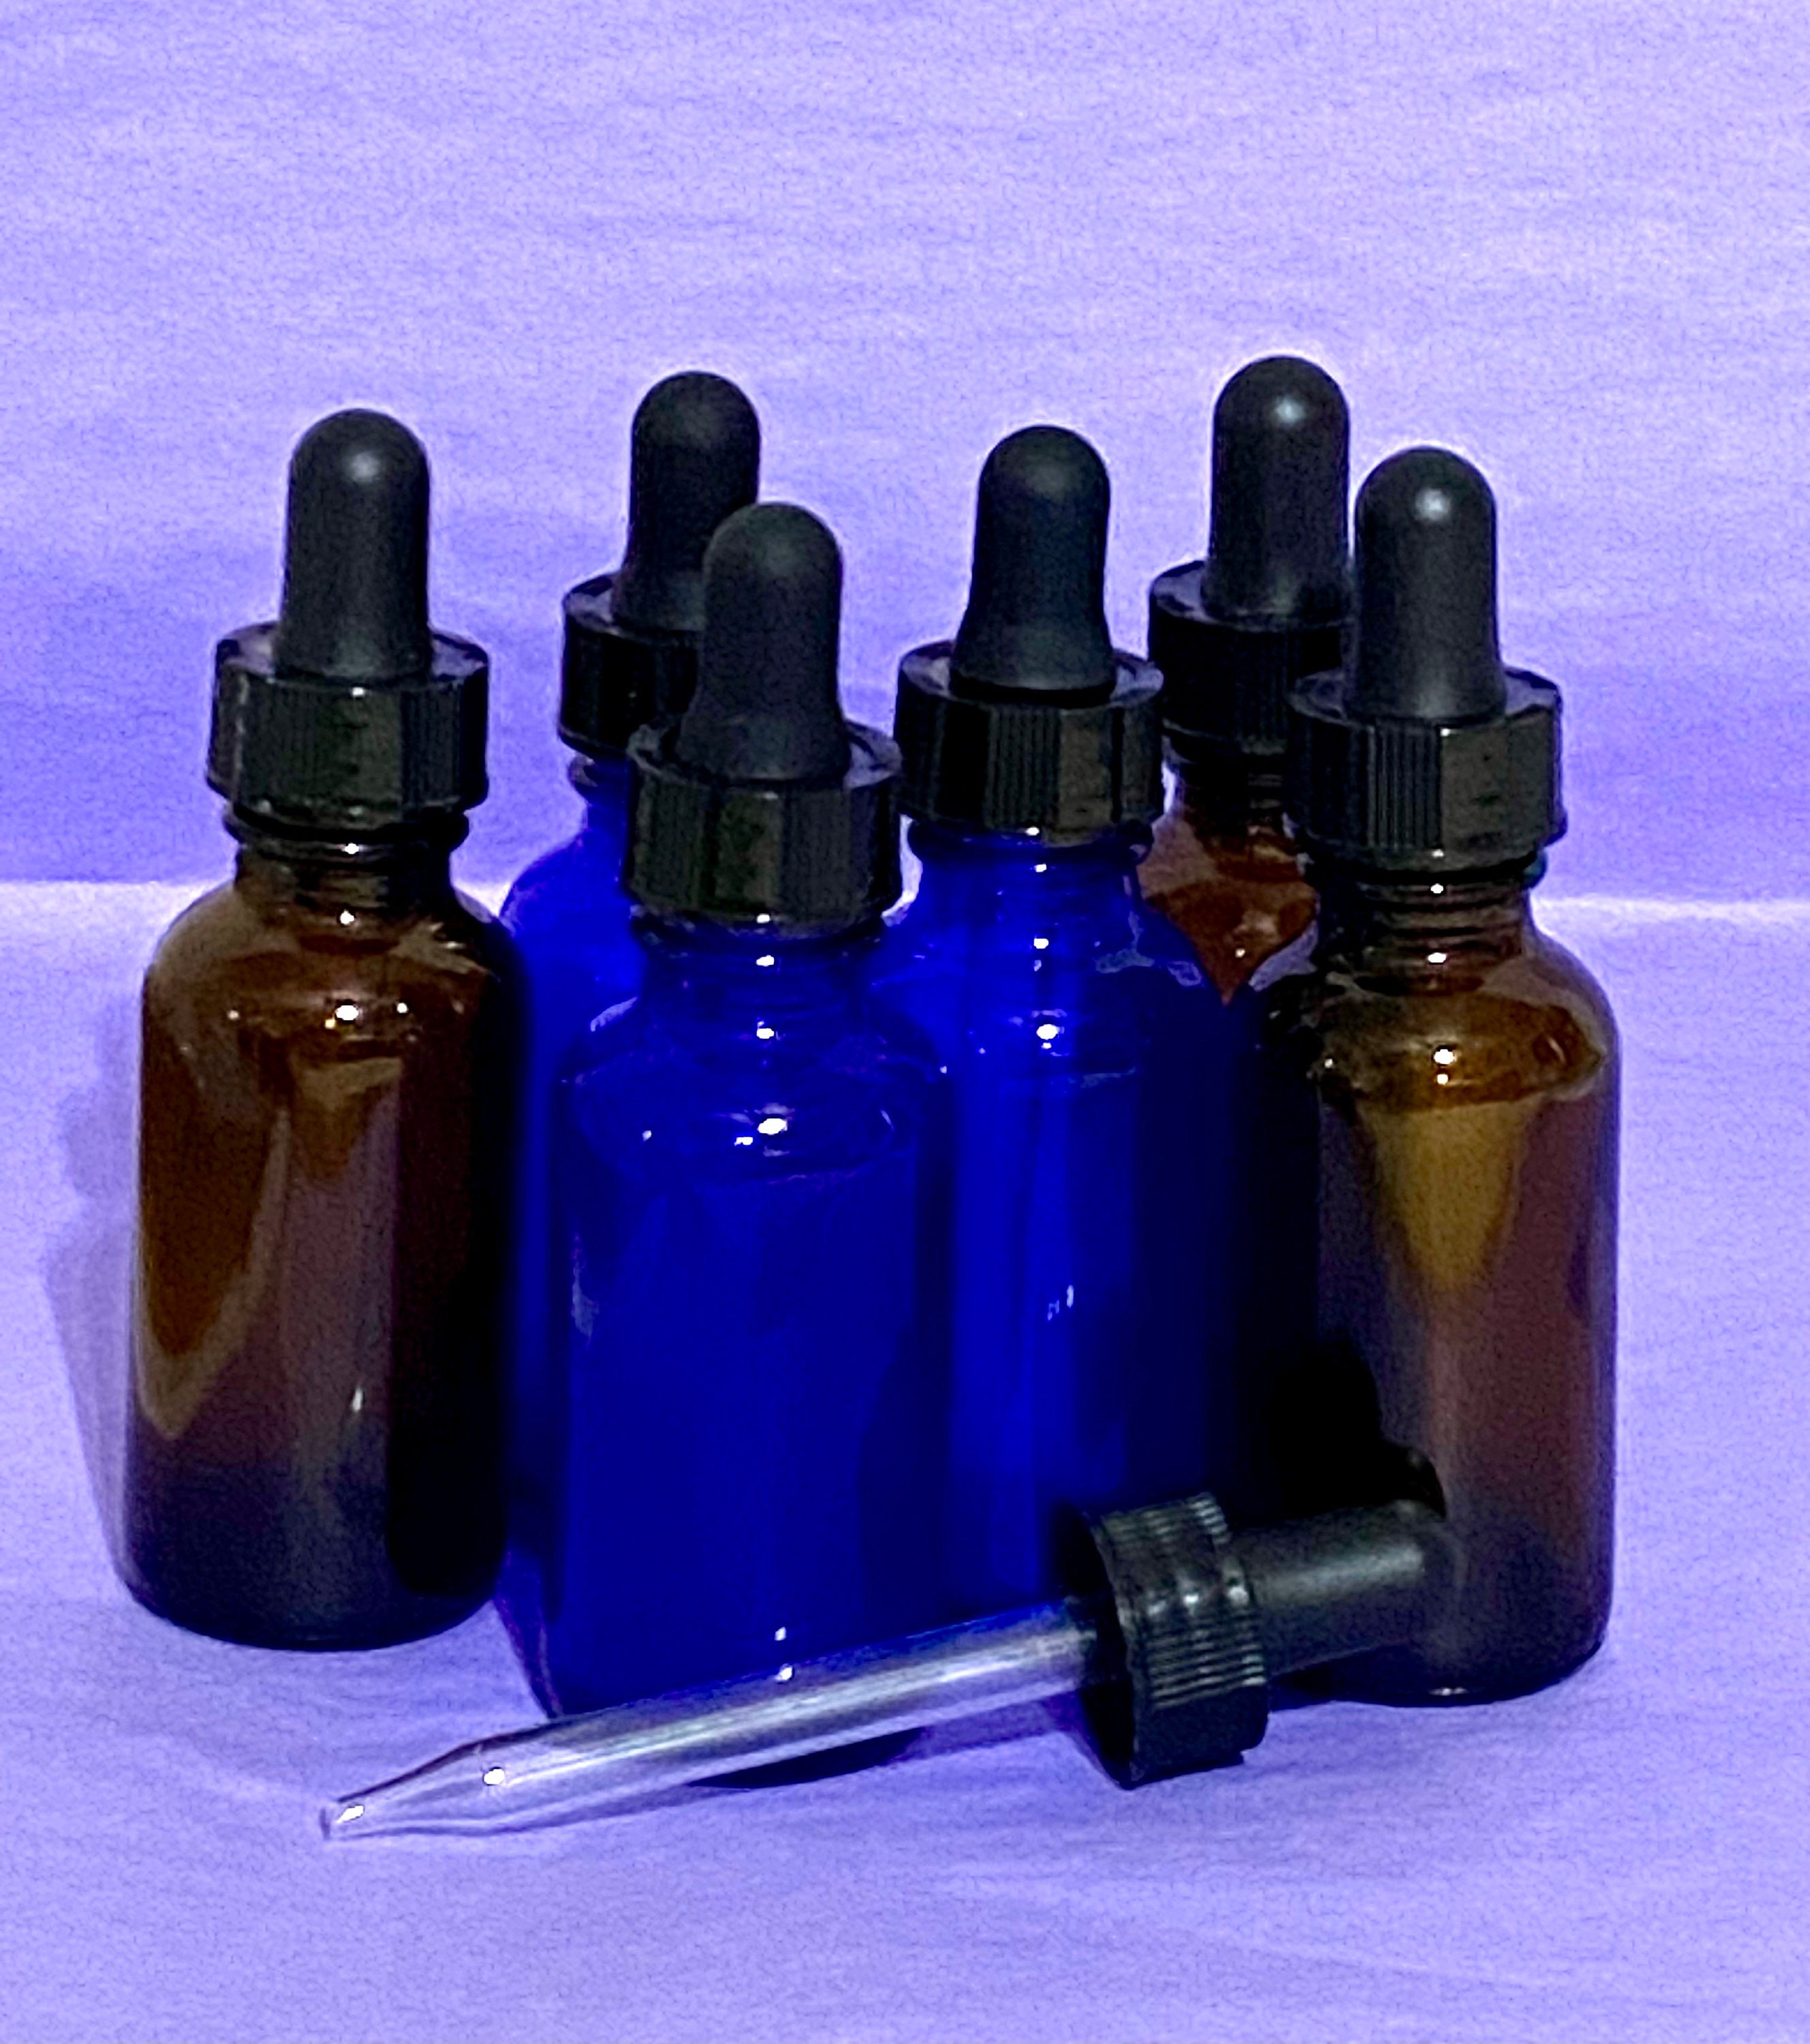 Cobalt Blue 4oz Dropper Bottle (120ml) Pack of 12 - Glass Tincture Bottles  with Eye Droppers for Essential Oils & More Liquids - Leakproof Travel